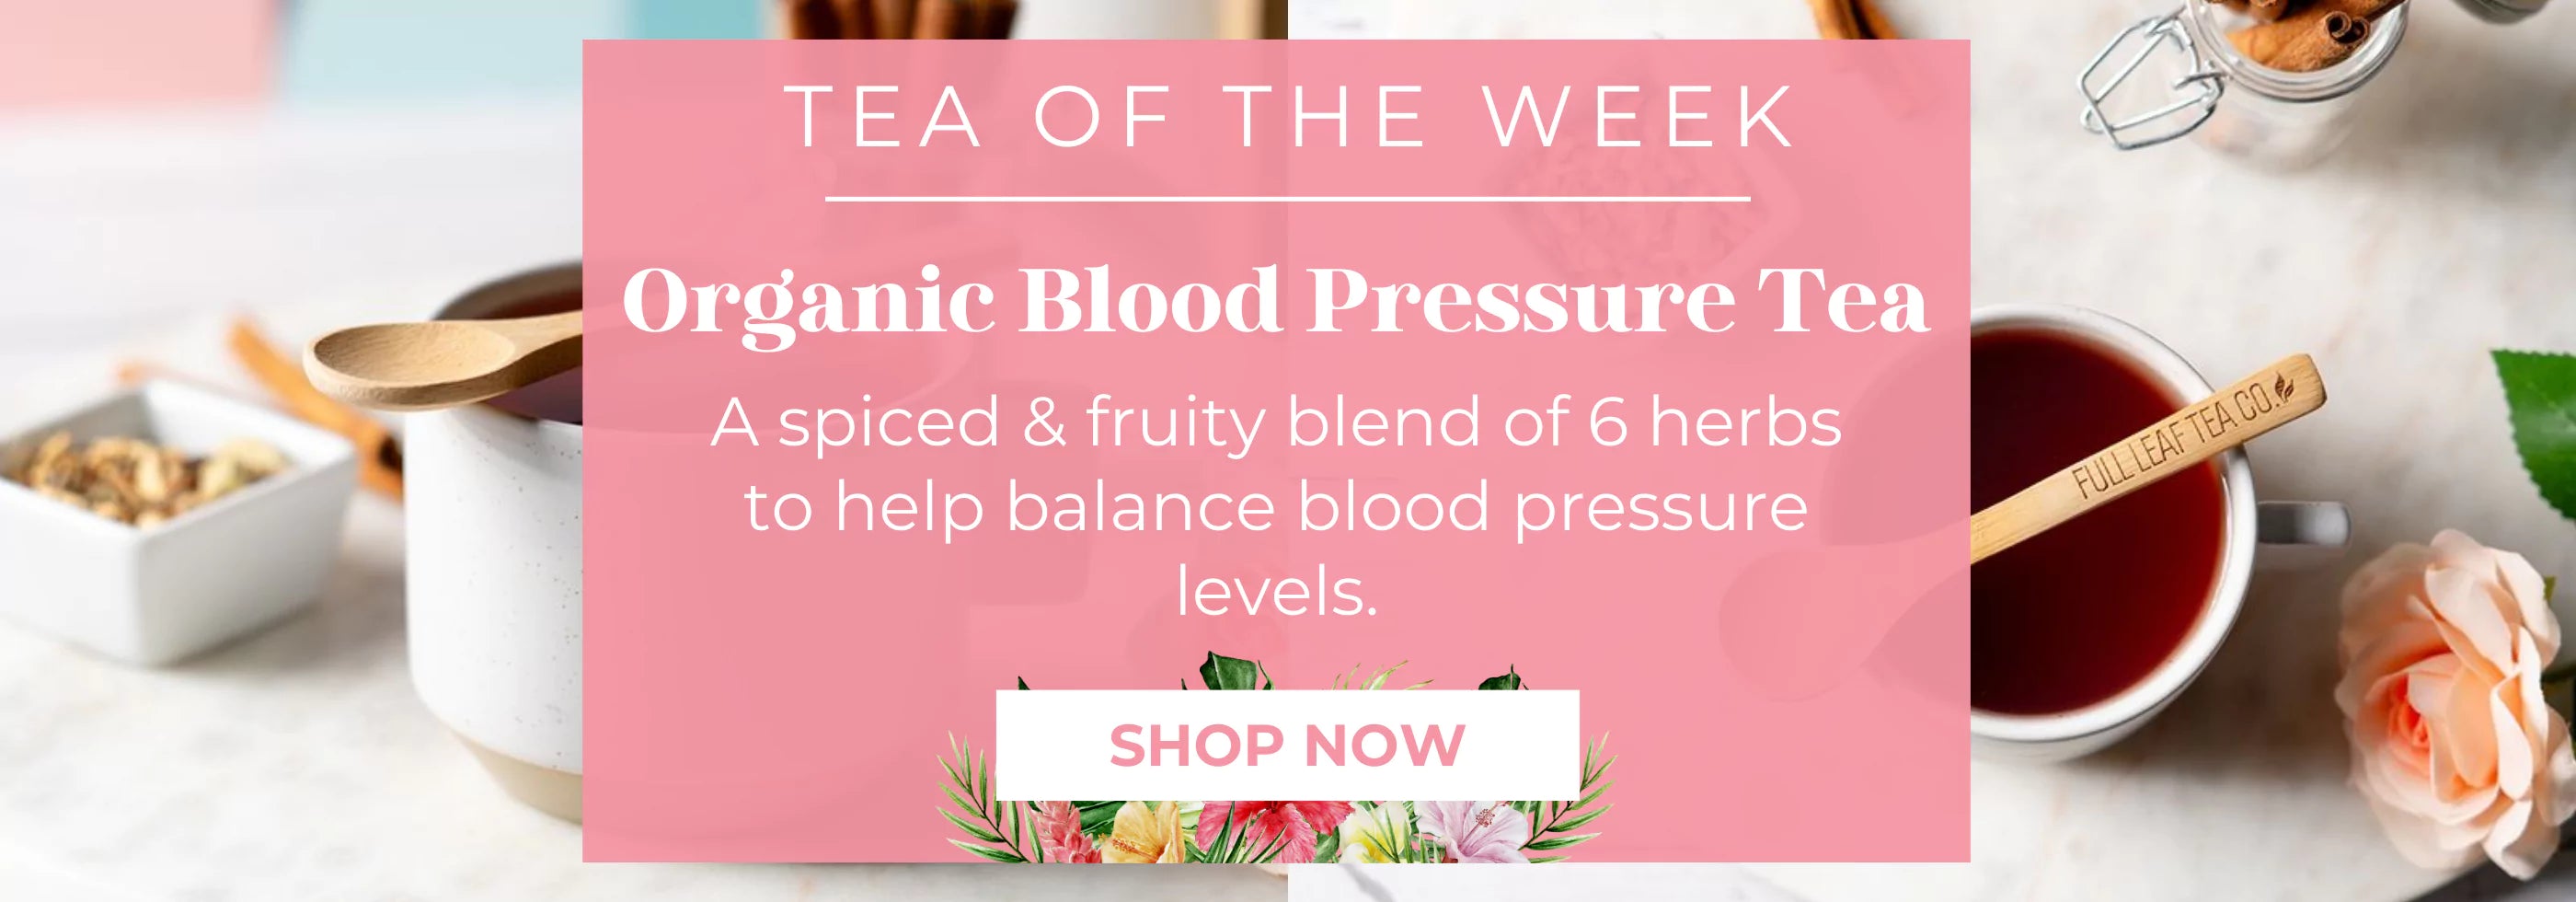 Tea of the Week: Organic Blood Pressure Tea with spiced and fruity blend